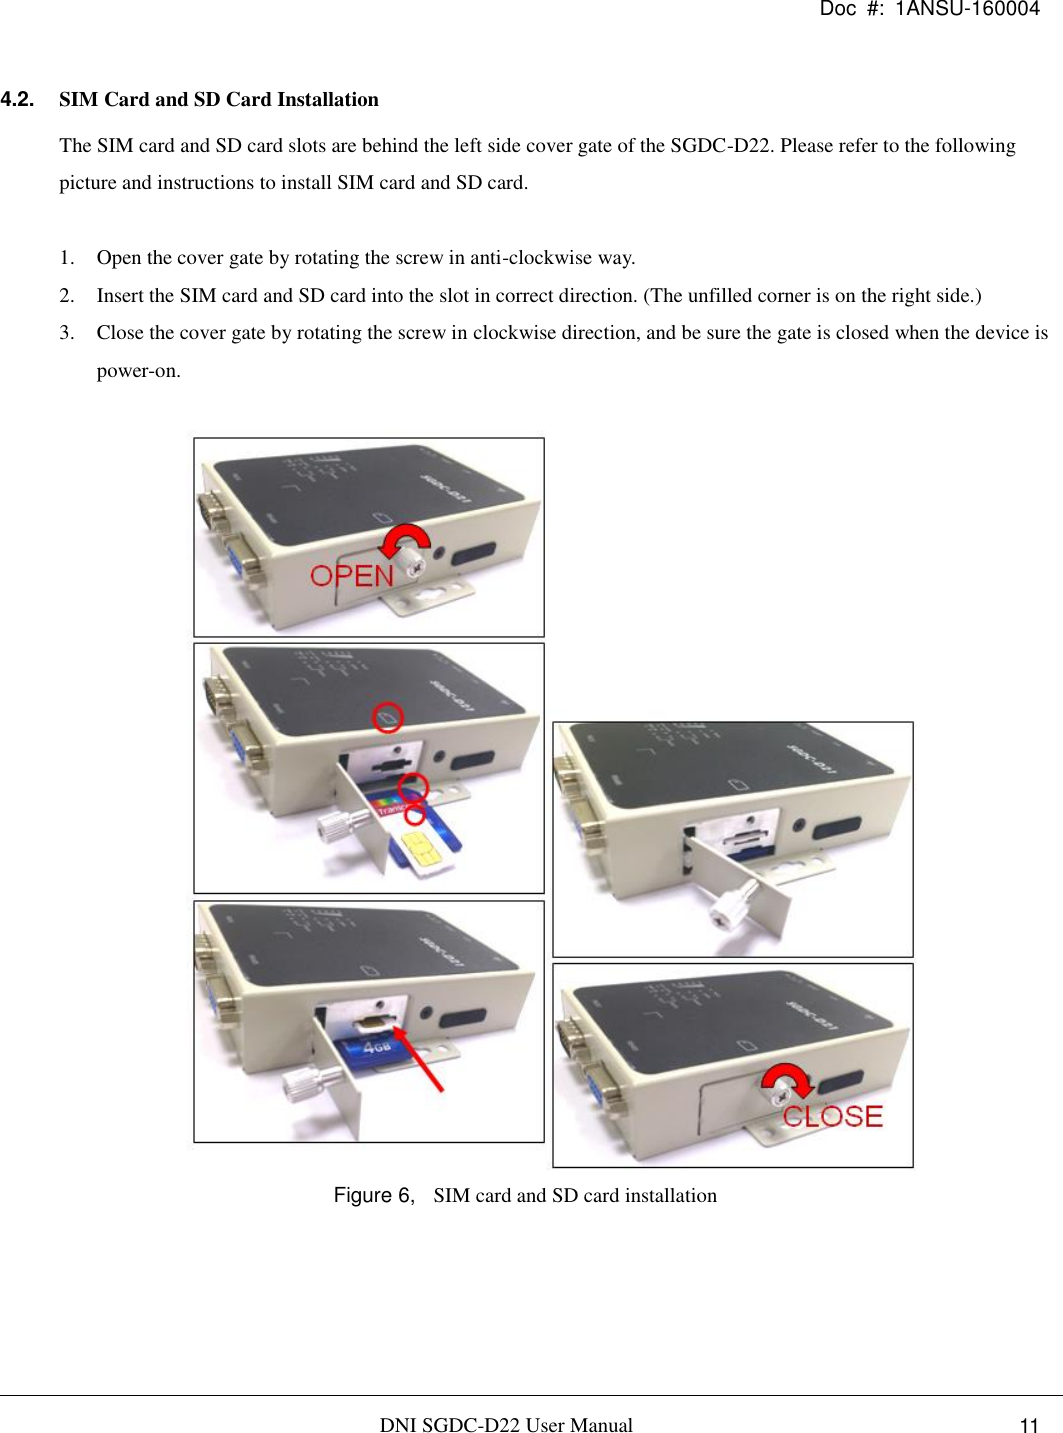 Doc  #:  1ANSU-160004   DNI SGDC-D22 User Manual i. 11 4.2. SIM Card and SD Card Installation The SIM card and SD card slots are behind the left side cover gate of the SGDC-D22. Please refer to the following picture and instructions to install SIM card and SD card.  1. Open the cover gate by rotating the screw in anti-clockwise way. 2. Insert the SIM card and SD card into the slot in correct direction. (The unfilled corner is on the right side.) 3. Close the cover gate by rotating the screw in clockwise direction, and be sure the gate is closed when the device is power-on.   Figure 6,  SIM card and SD card installation   